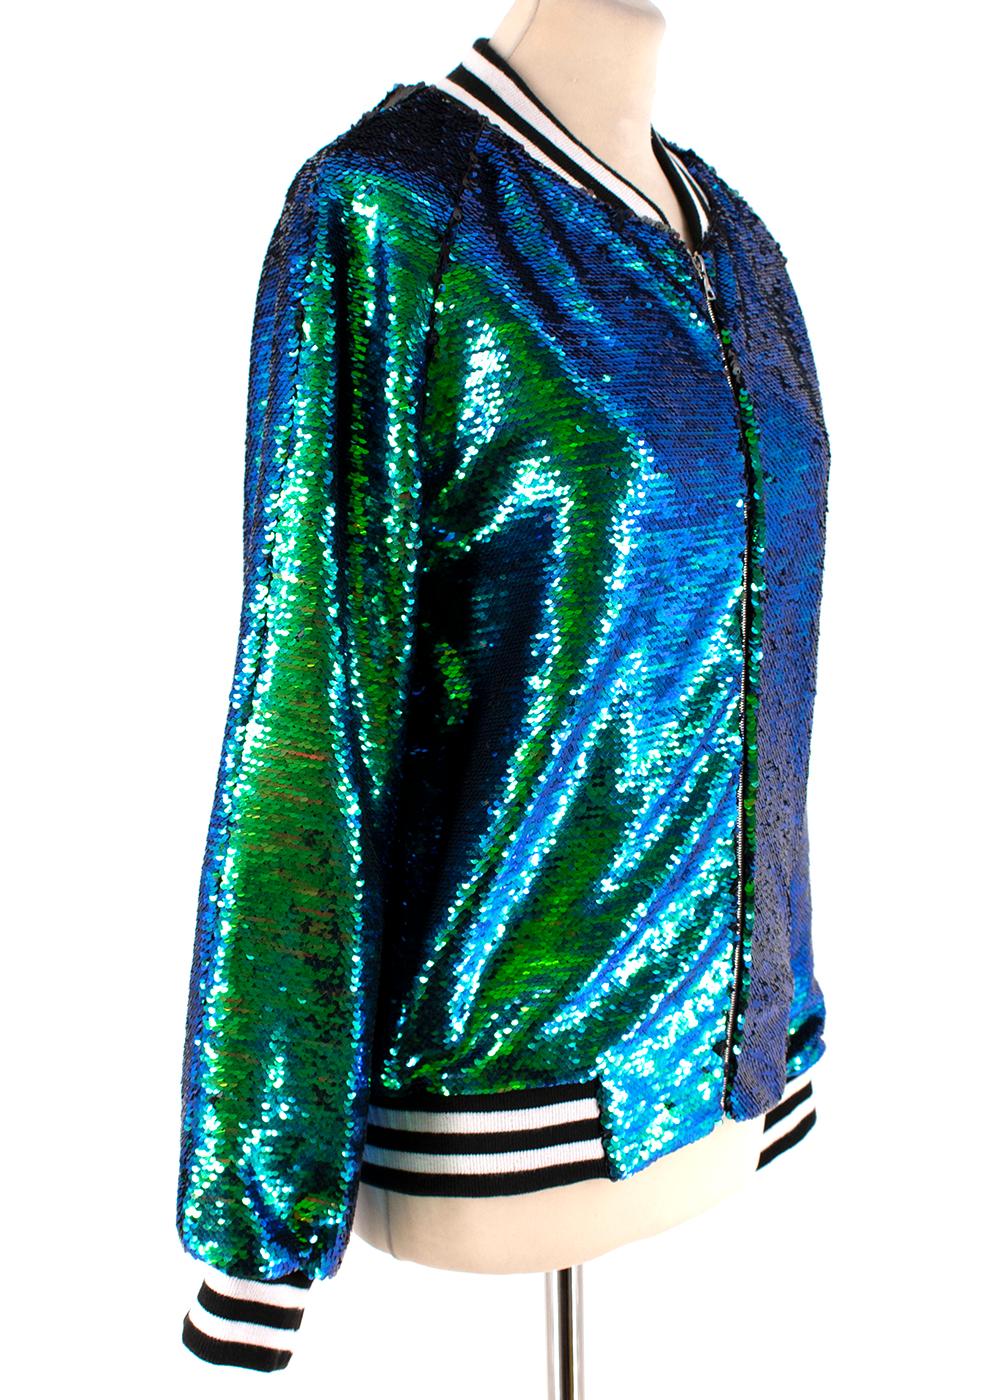 Libertine Green Sequin Bomber Jacket 

- Front zip fastening 
- Two slip pockets 
- Sequin embellished 
- Black & white striped ribbed trim 

Materials:
- Polyester 

Dry clean only 

Handmade in America 

Shoulders - 24cm
Sleeves - 48.5cm
Chest -